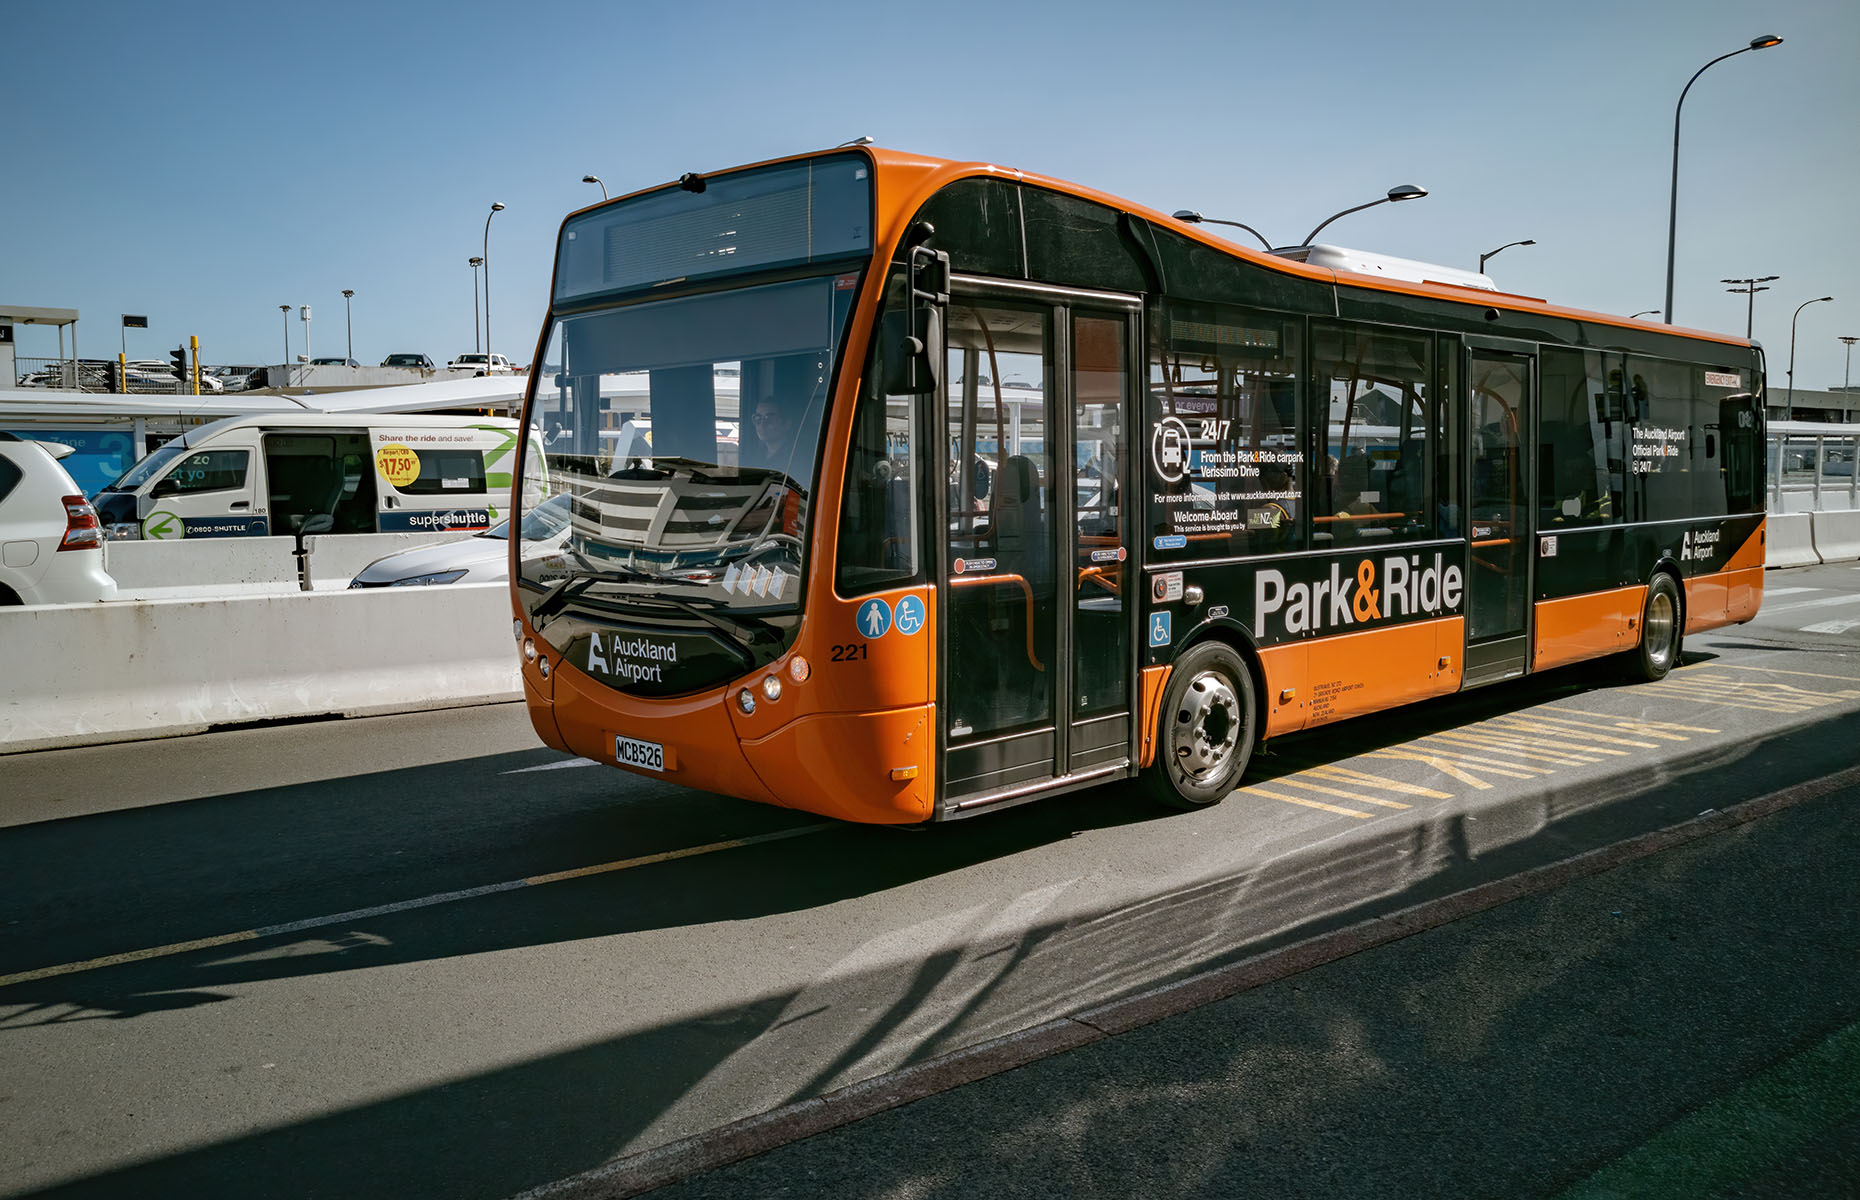 Park and ride bus (Image: Emagnetic/Shutterstock)